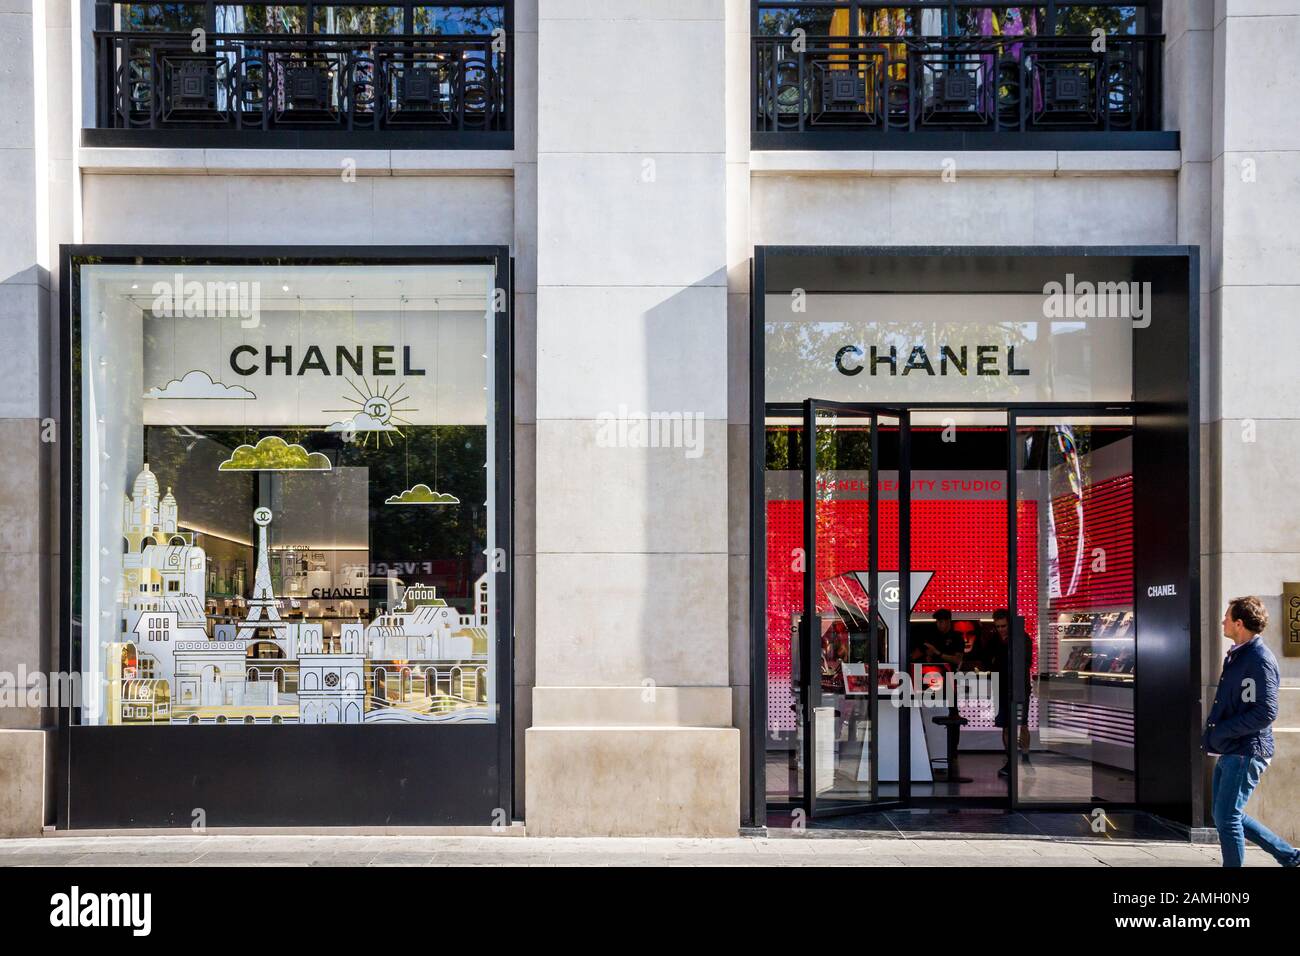 Paris/France - September 10, 2019 : The Chanel luxury perfume store on ...